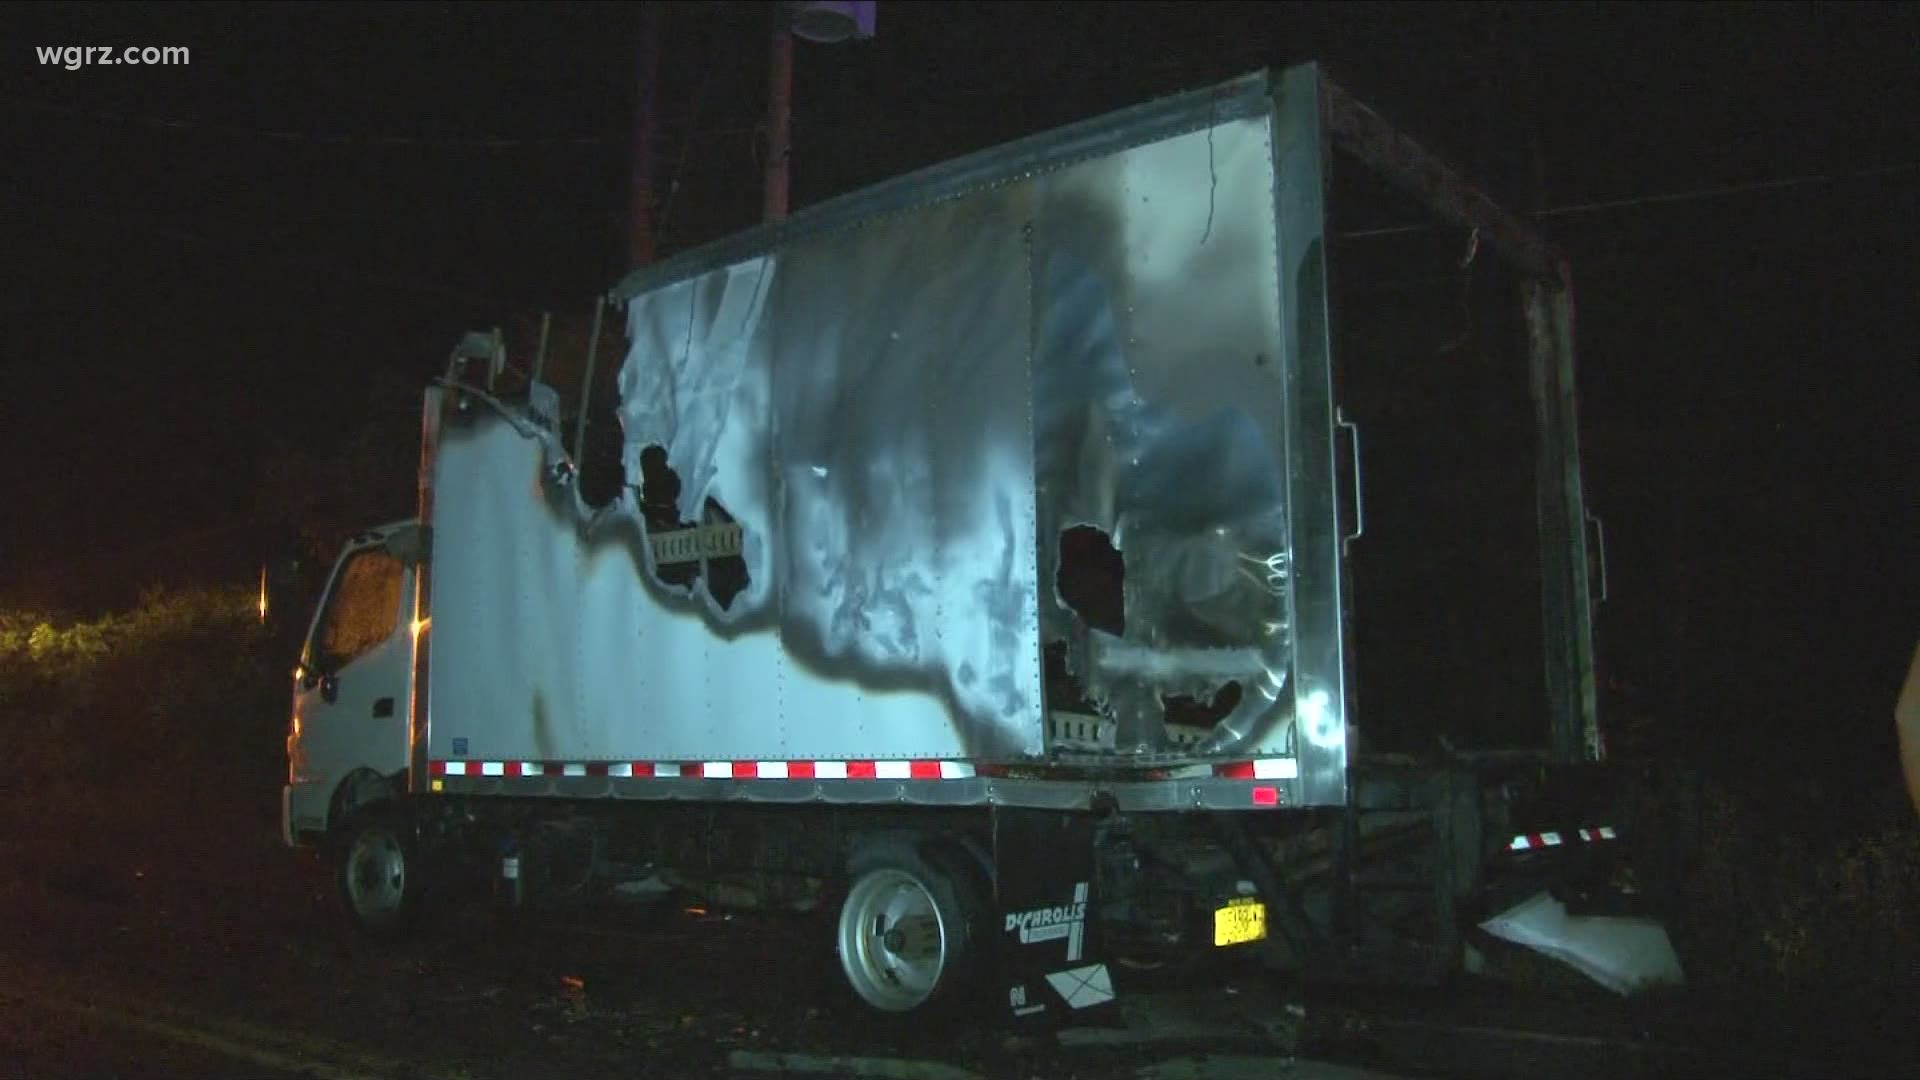 The box truck was returning from a fireworks show in Akron.